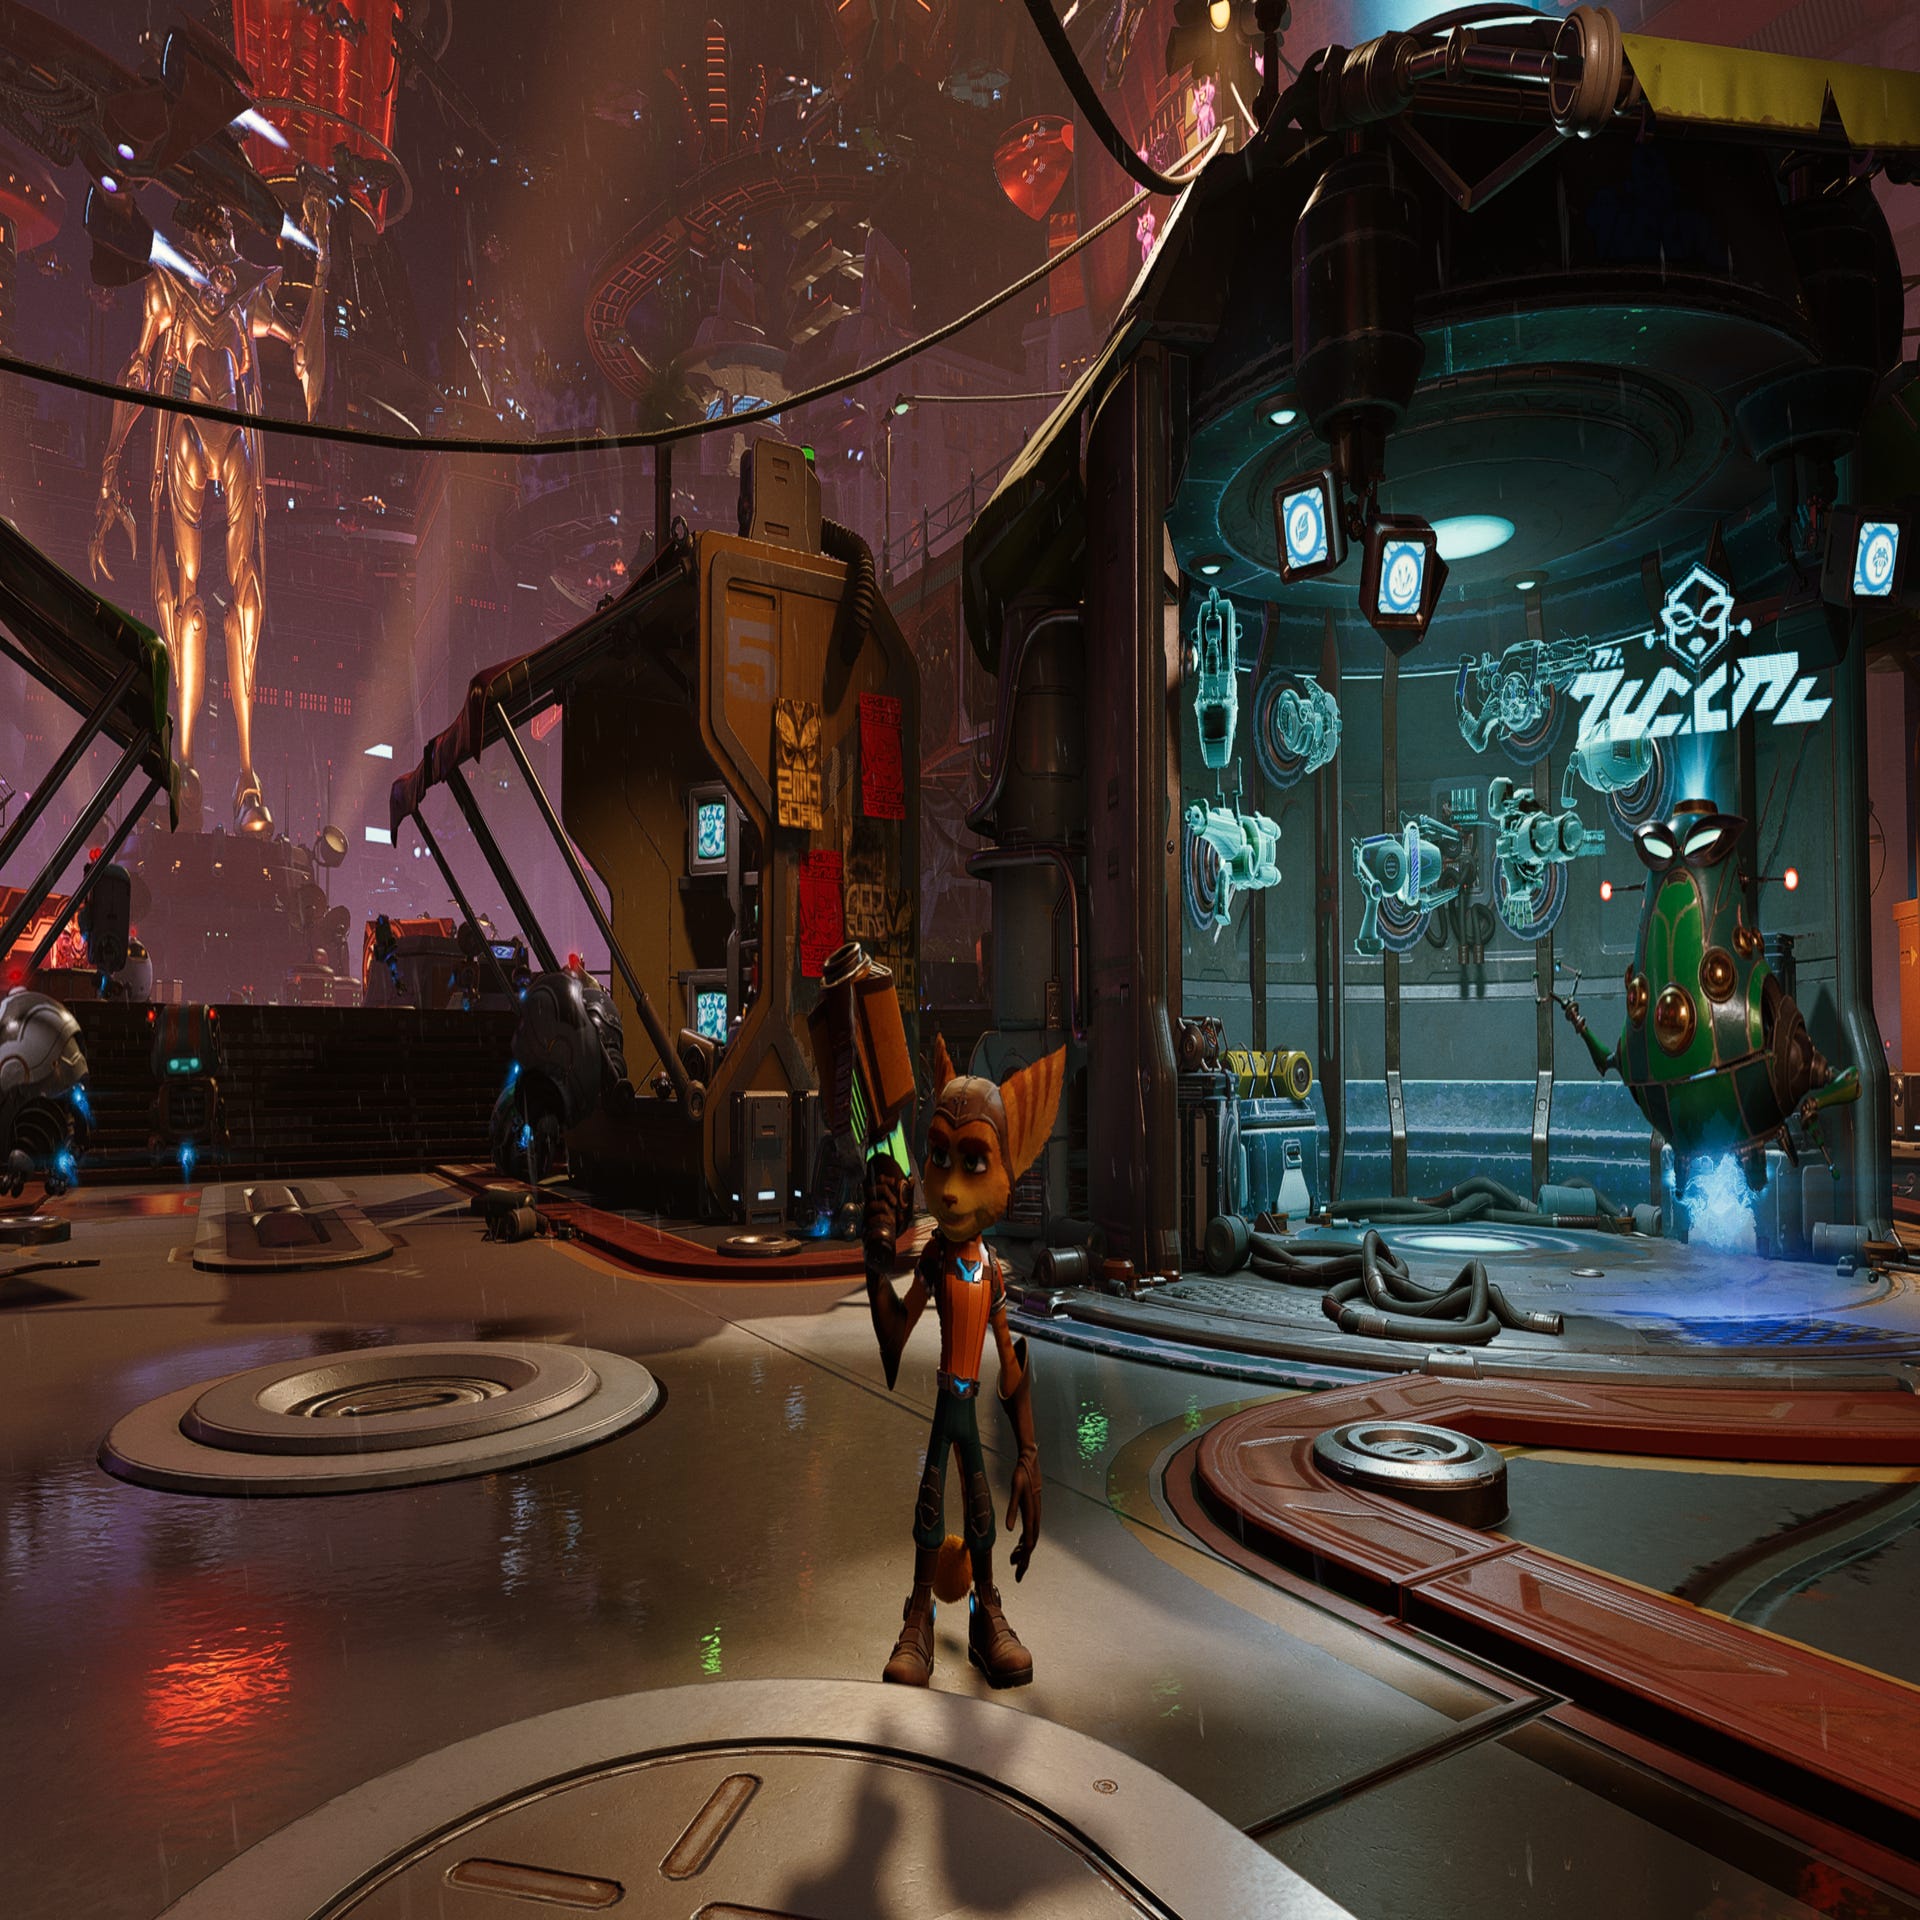 Ratchet & Clank: Rift Apart PC performance, and best settings